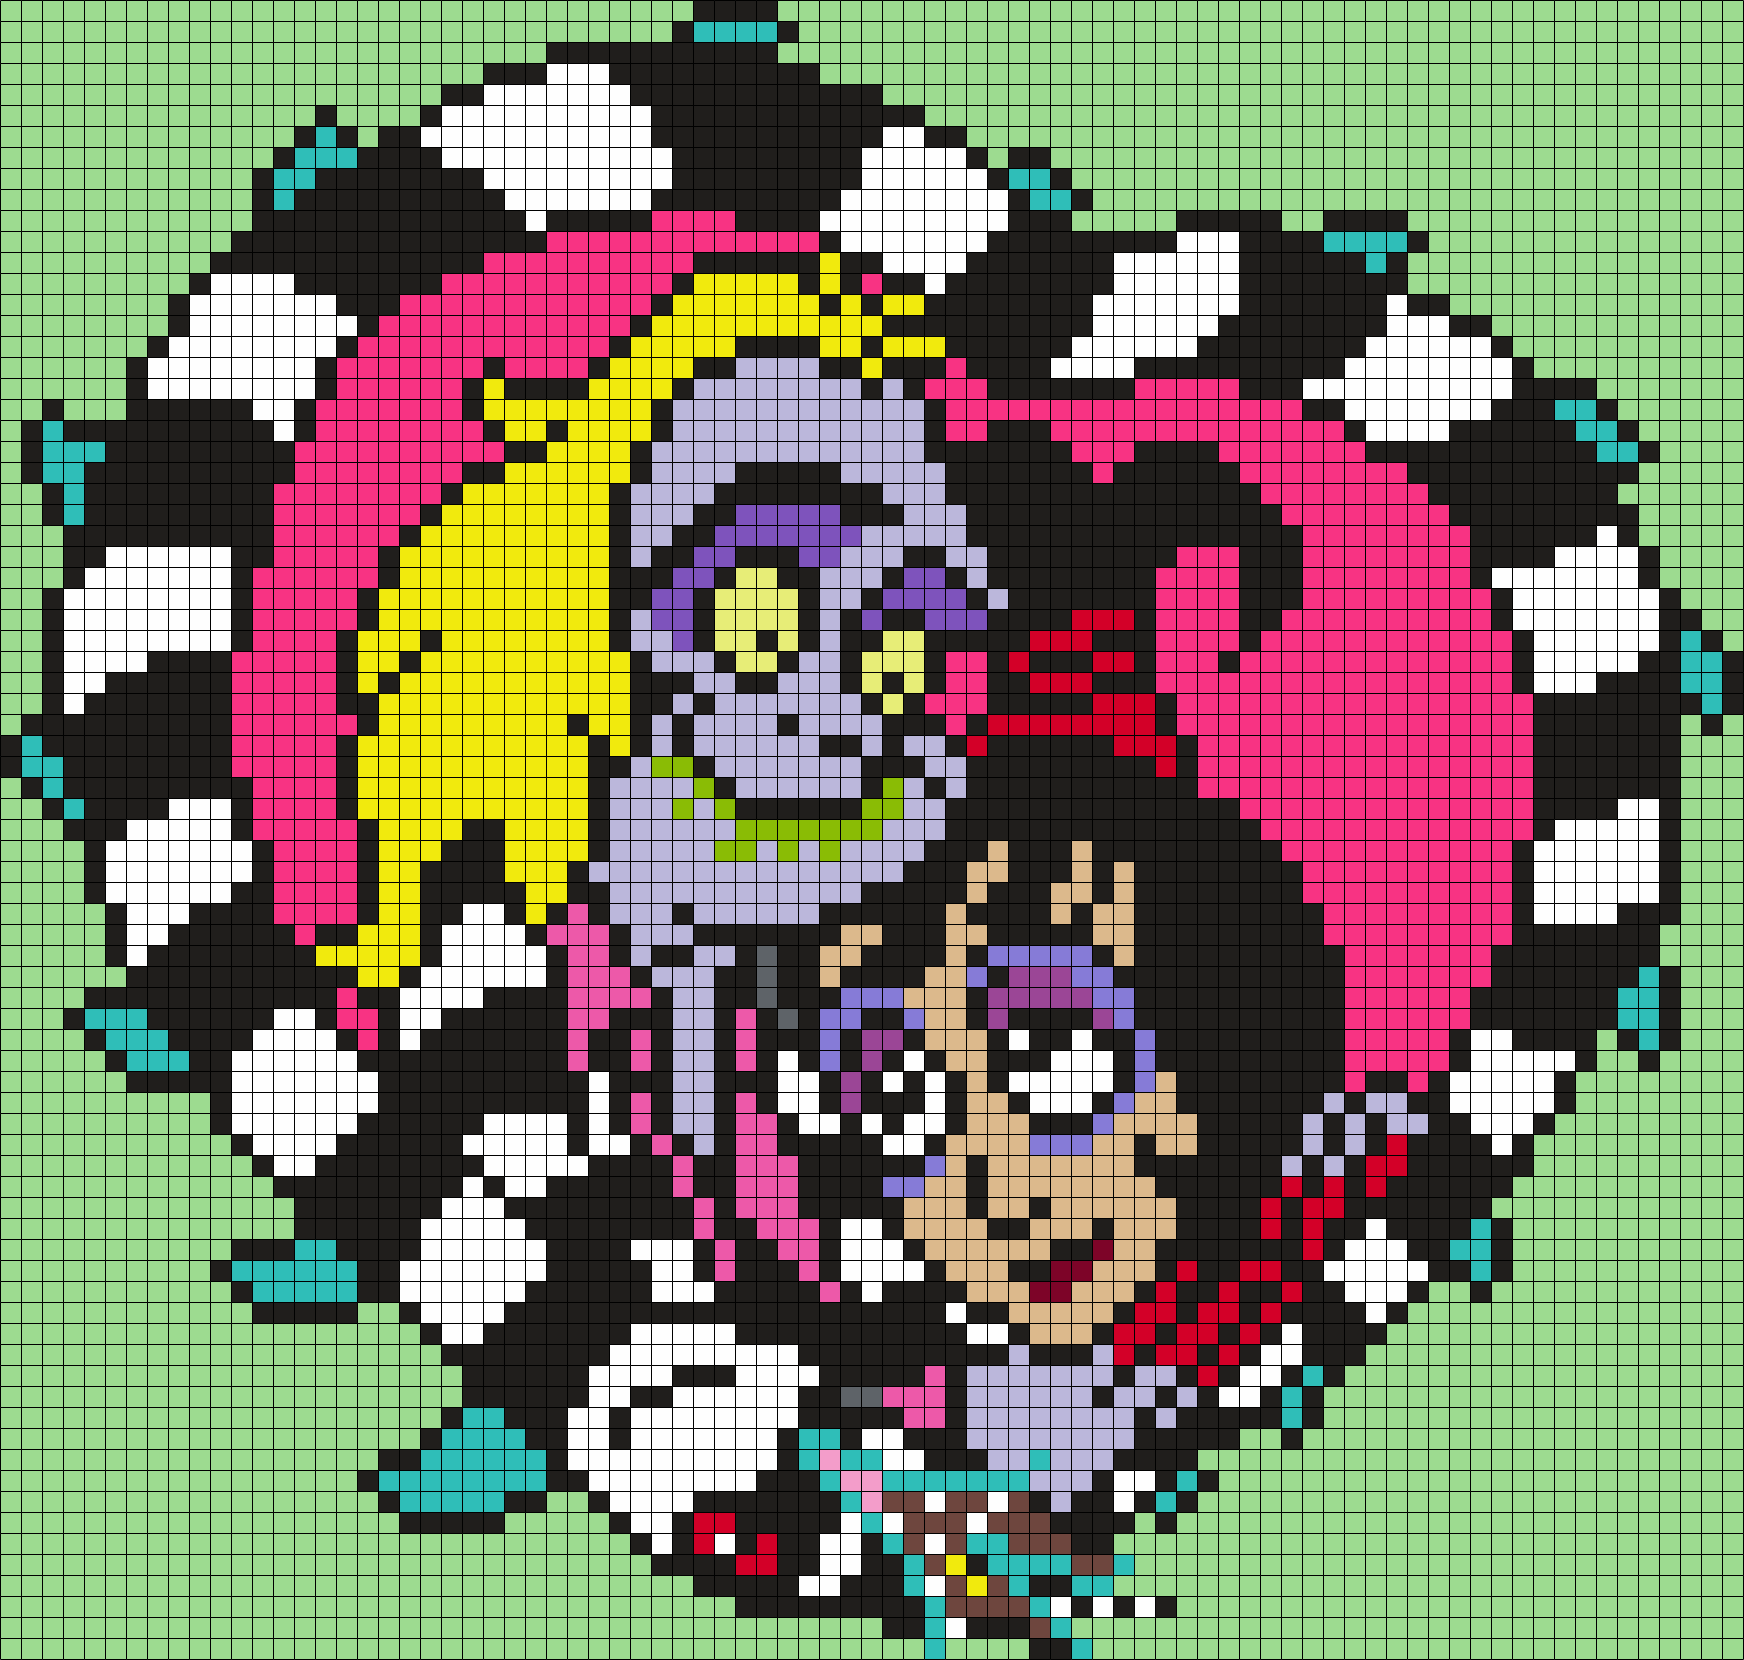 Beetlejuice And Lydia In A Sandworm Heart (from Beetlejuice)